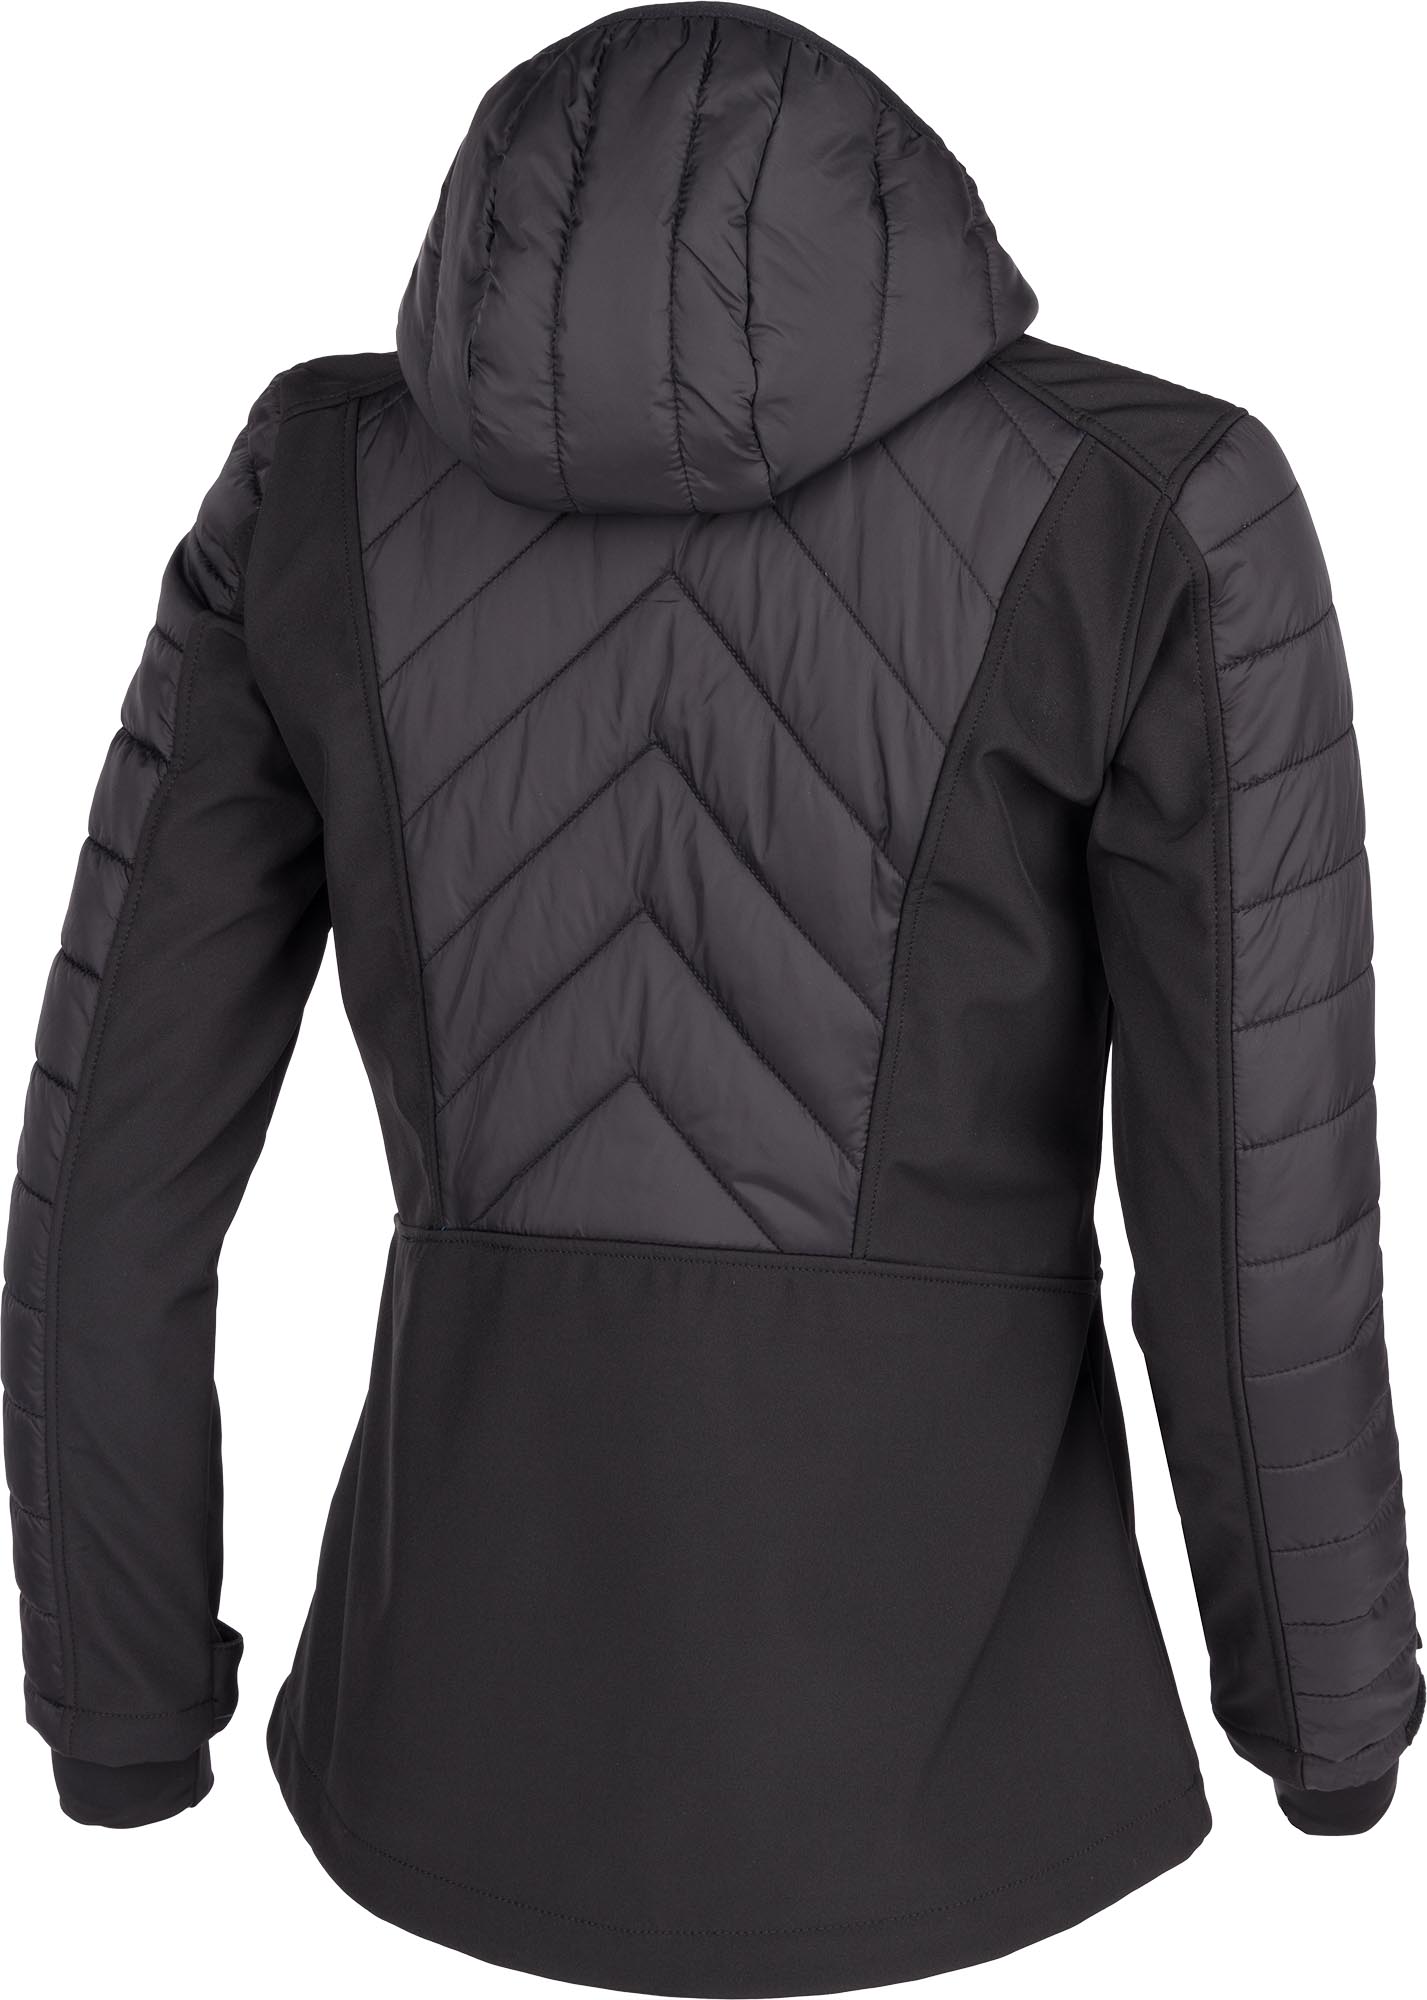 Women’s softshell - quilted jacket